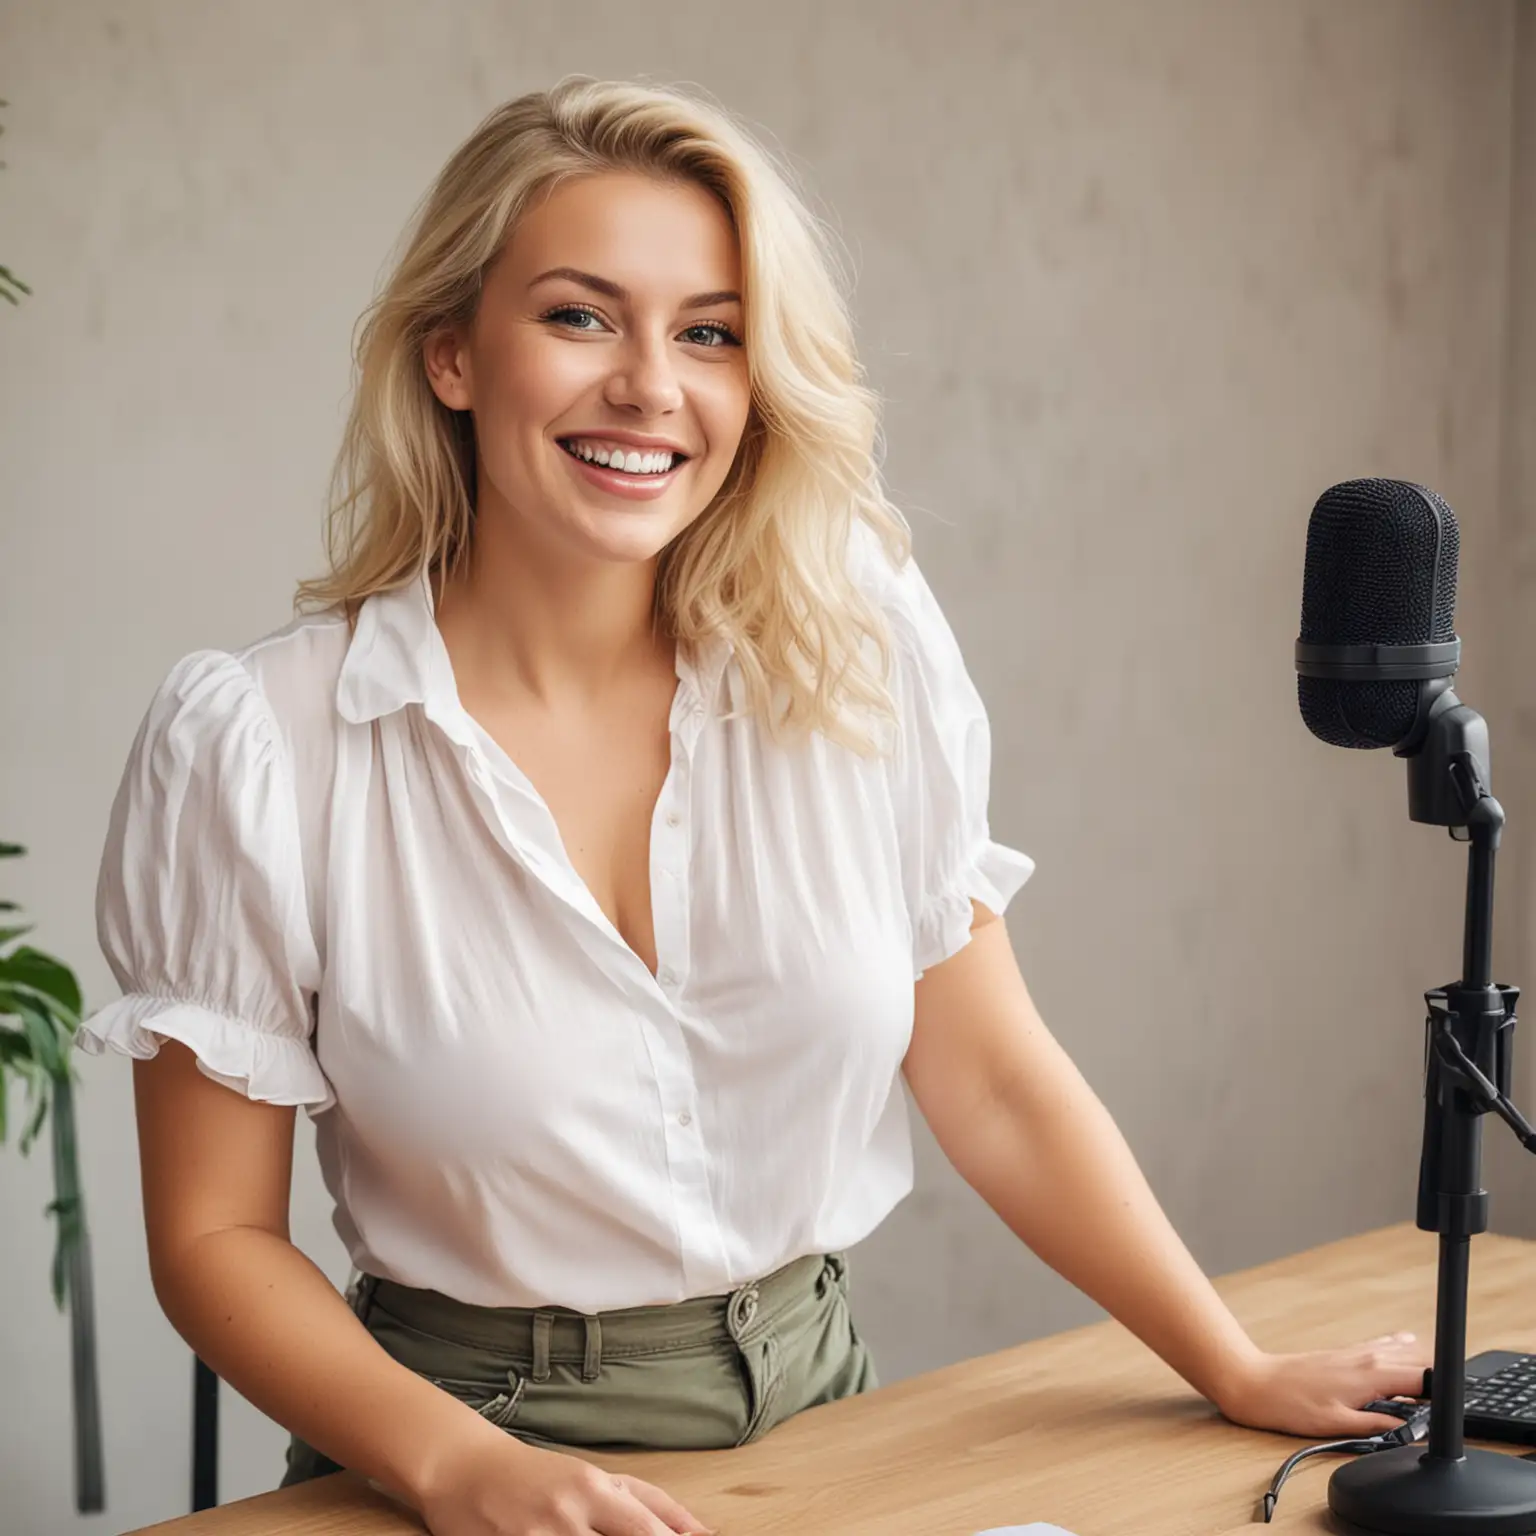 Blond-Woman-with-Natural-Breasts-Smiling-in-White-Blouse-and-Shorts-at-Desk